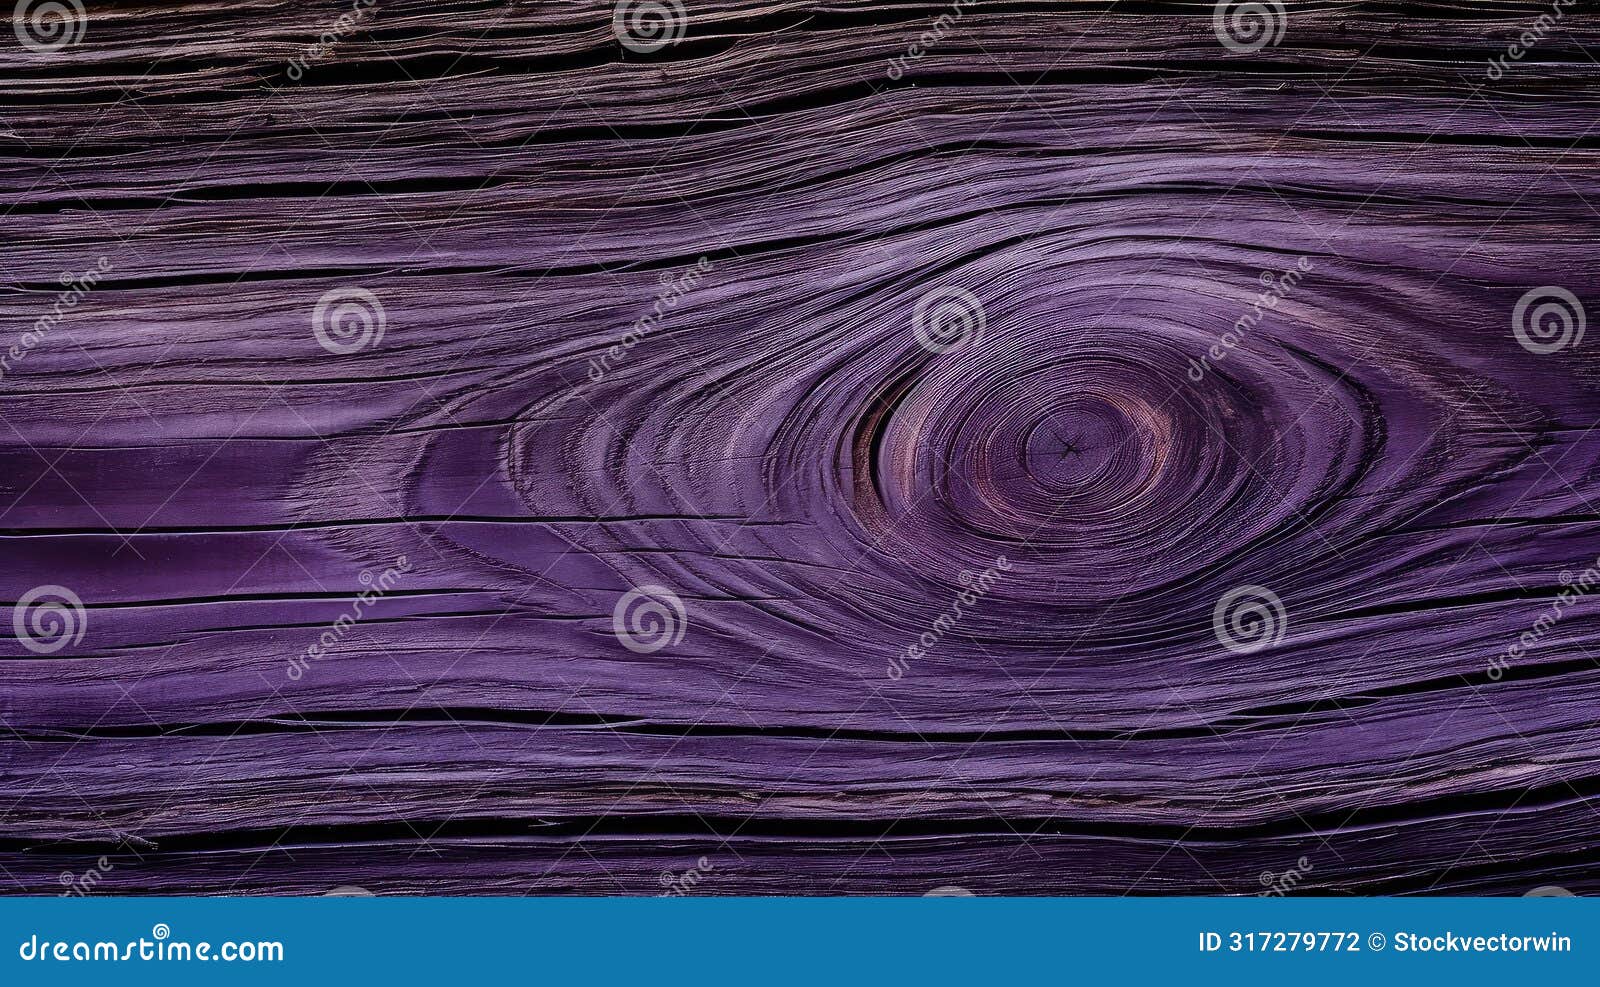 gra purple wood in the second photograph